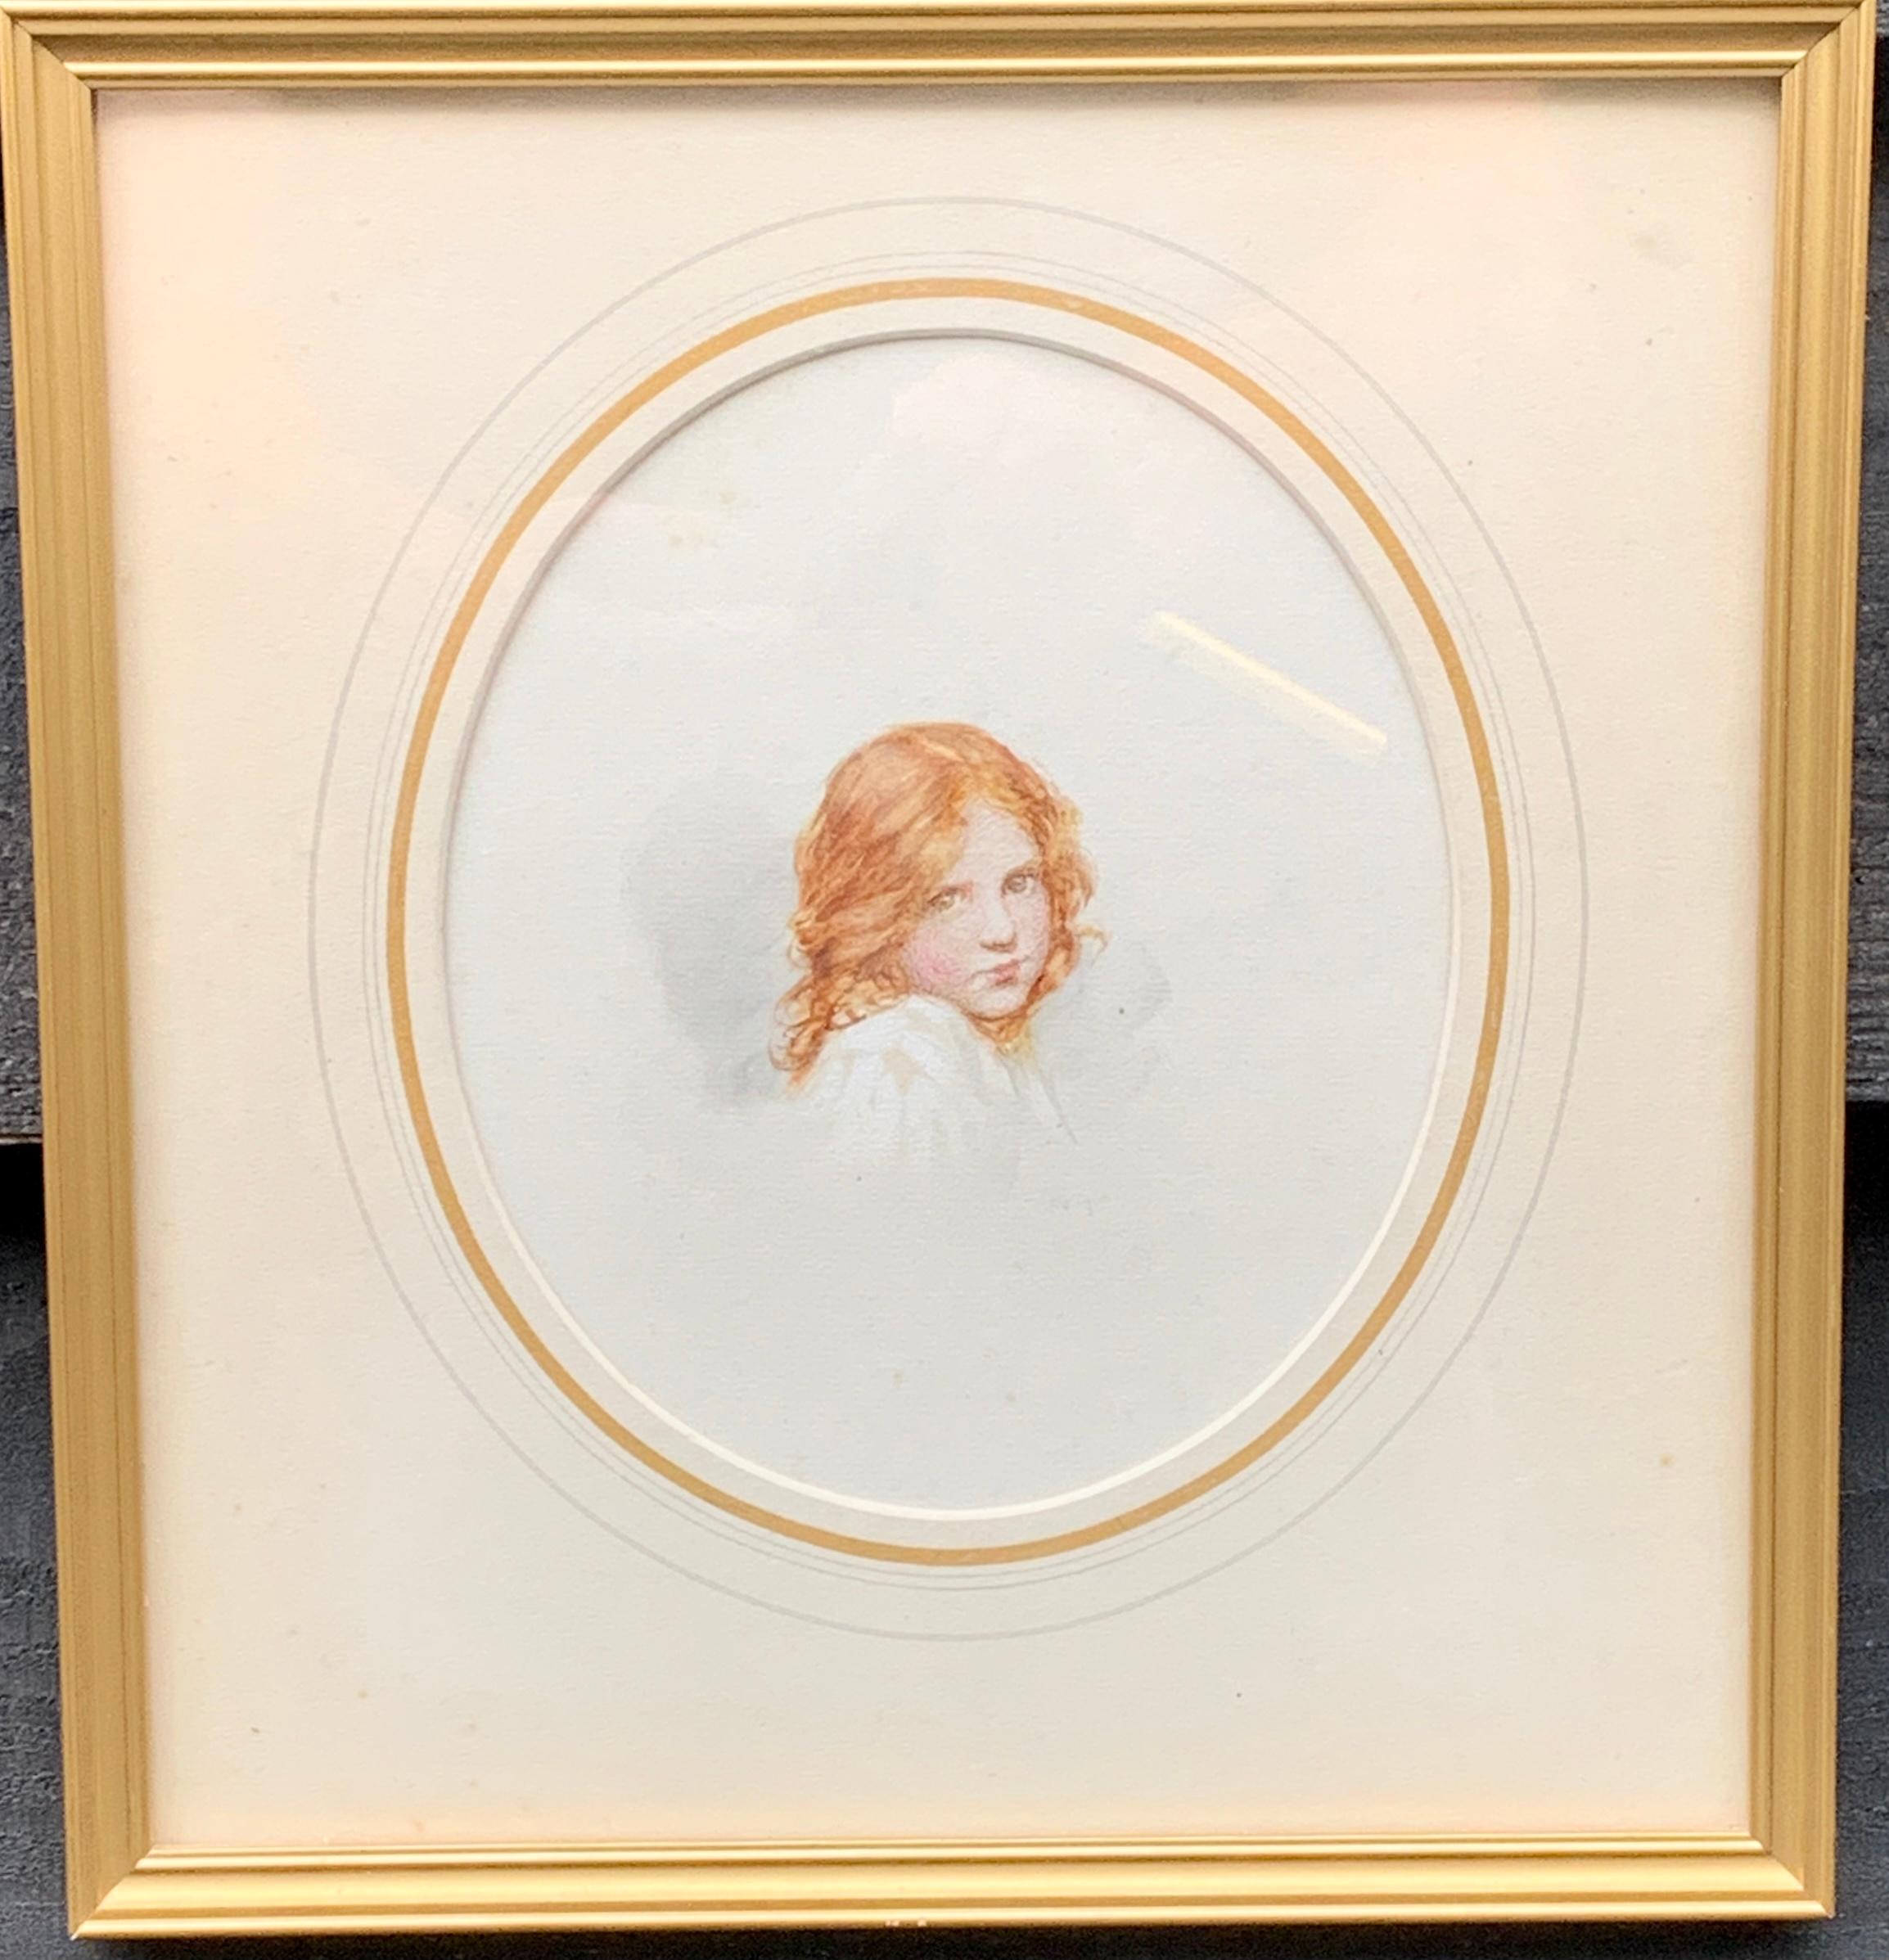 Early 20th century English portrait of a red haired young girl